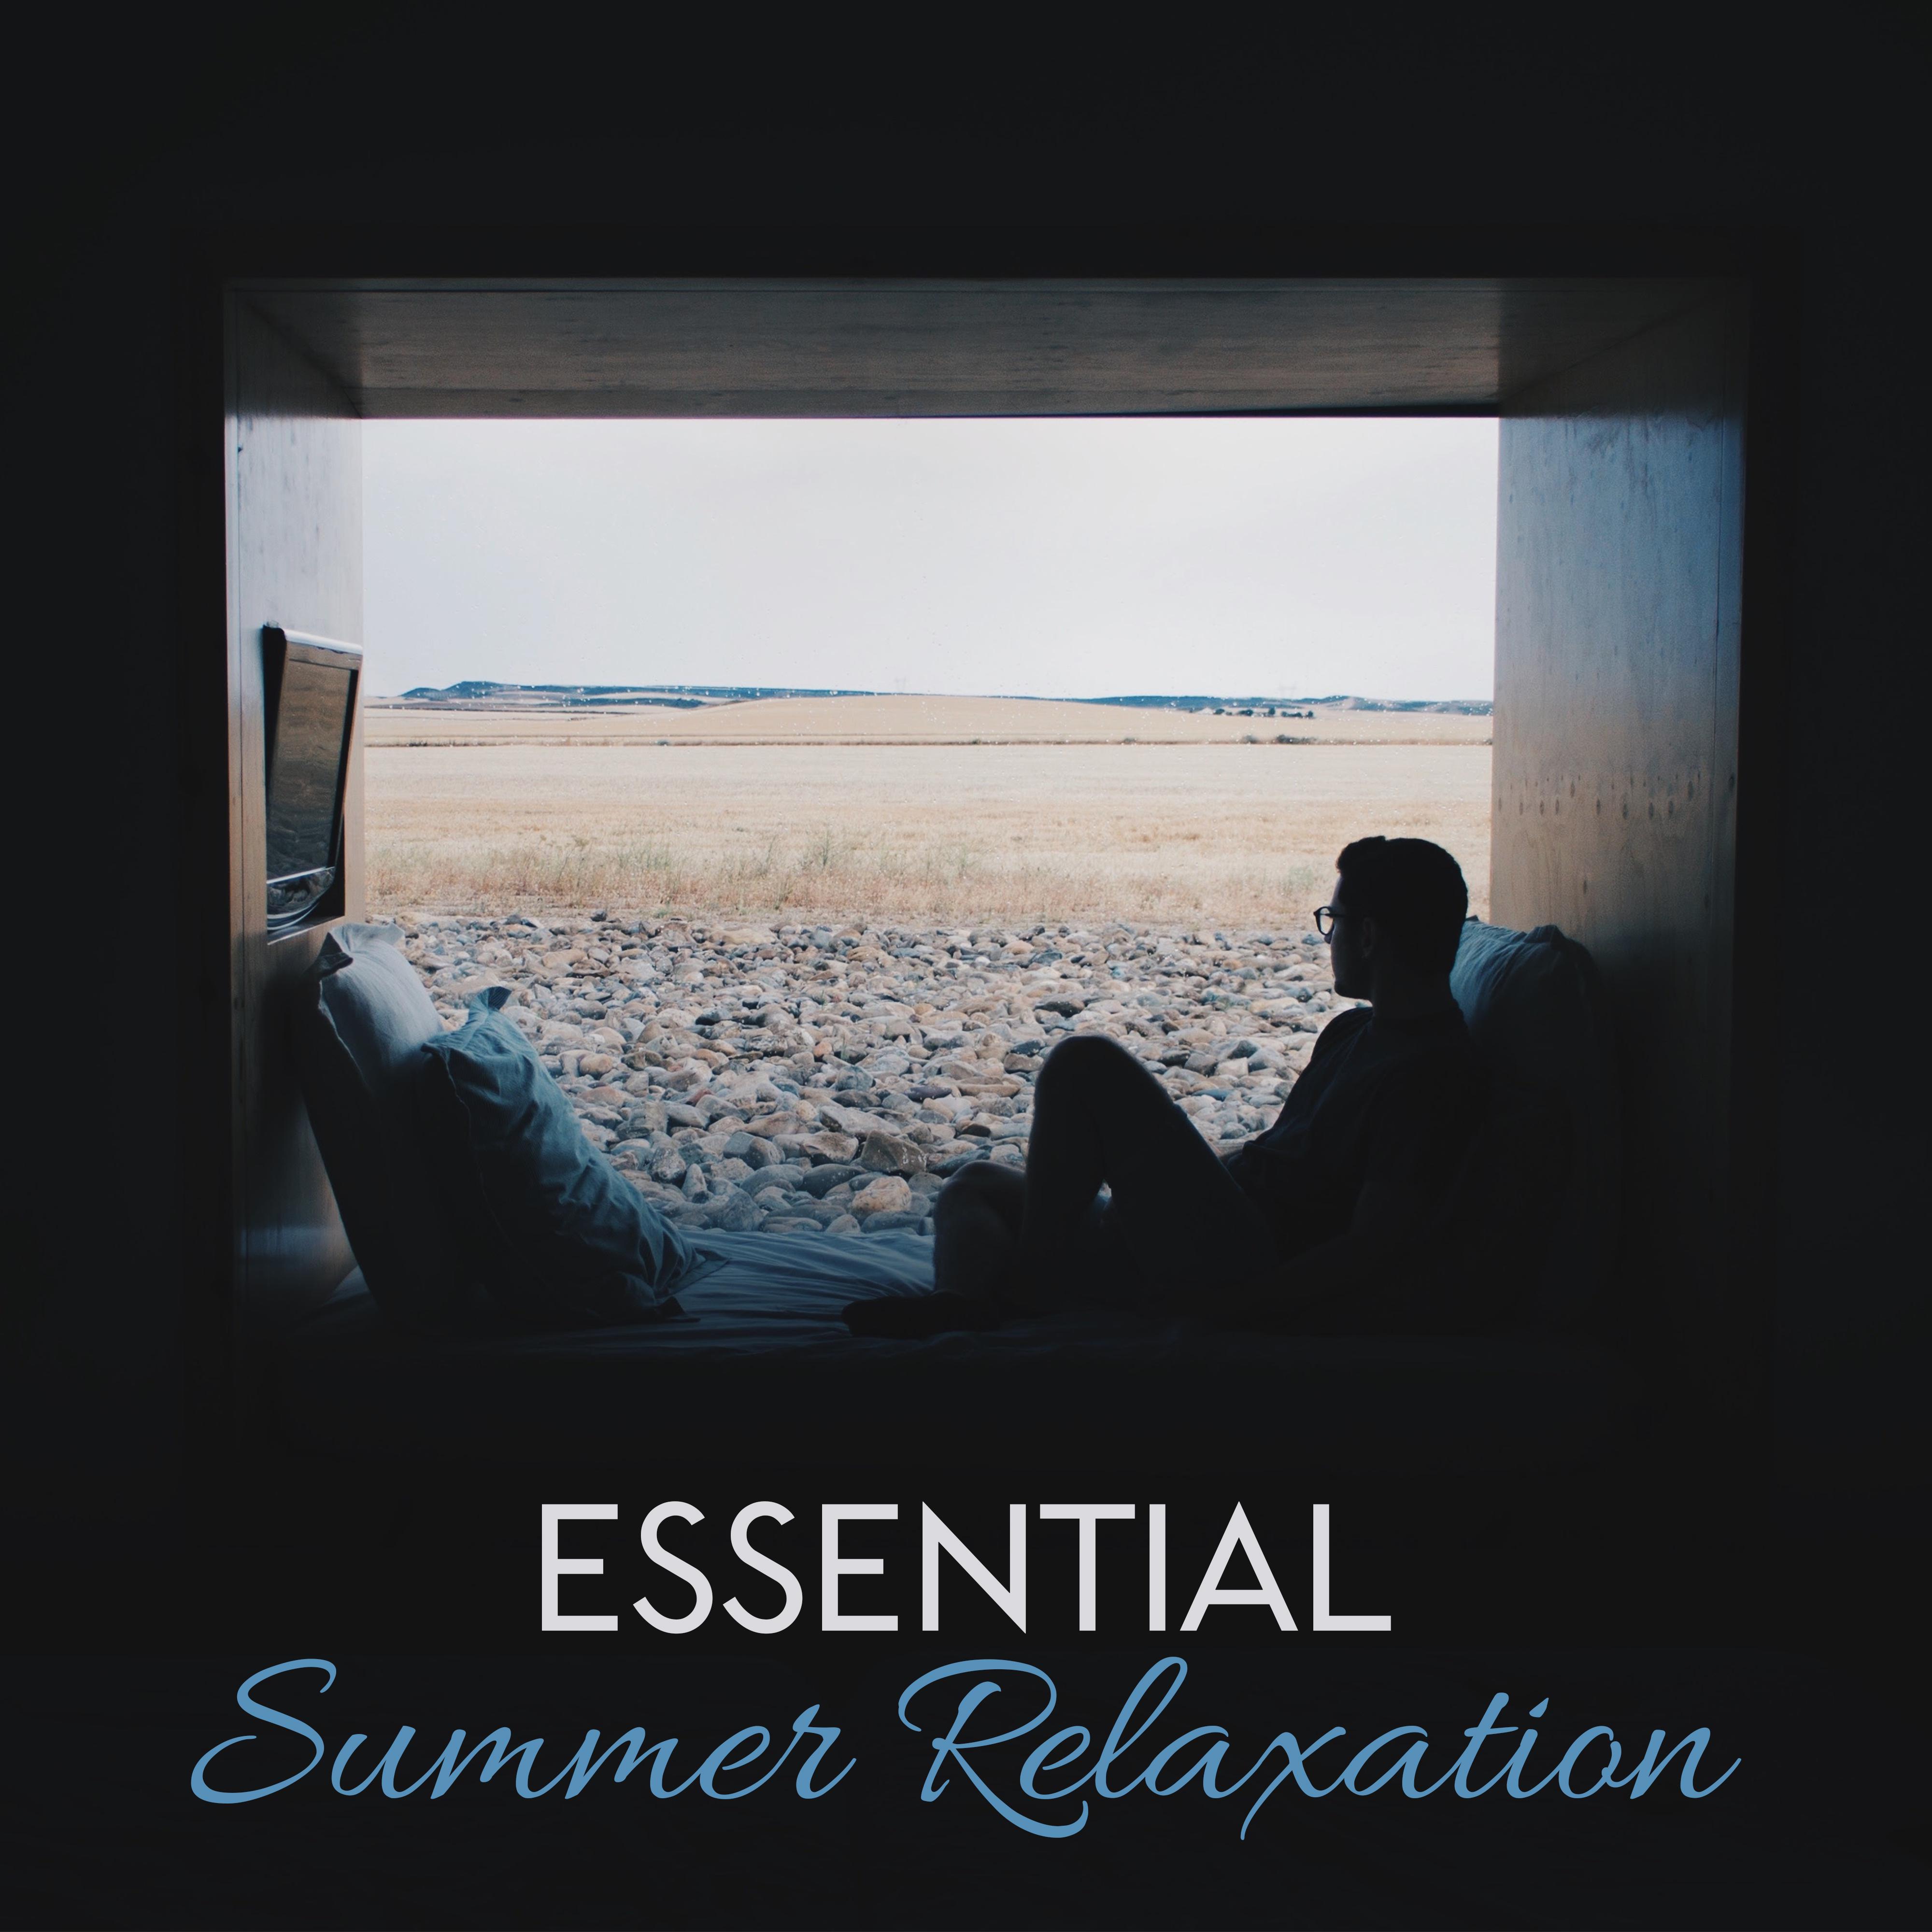 Essential Summer Relaxation